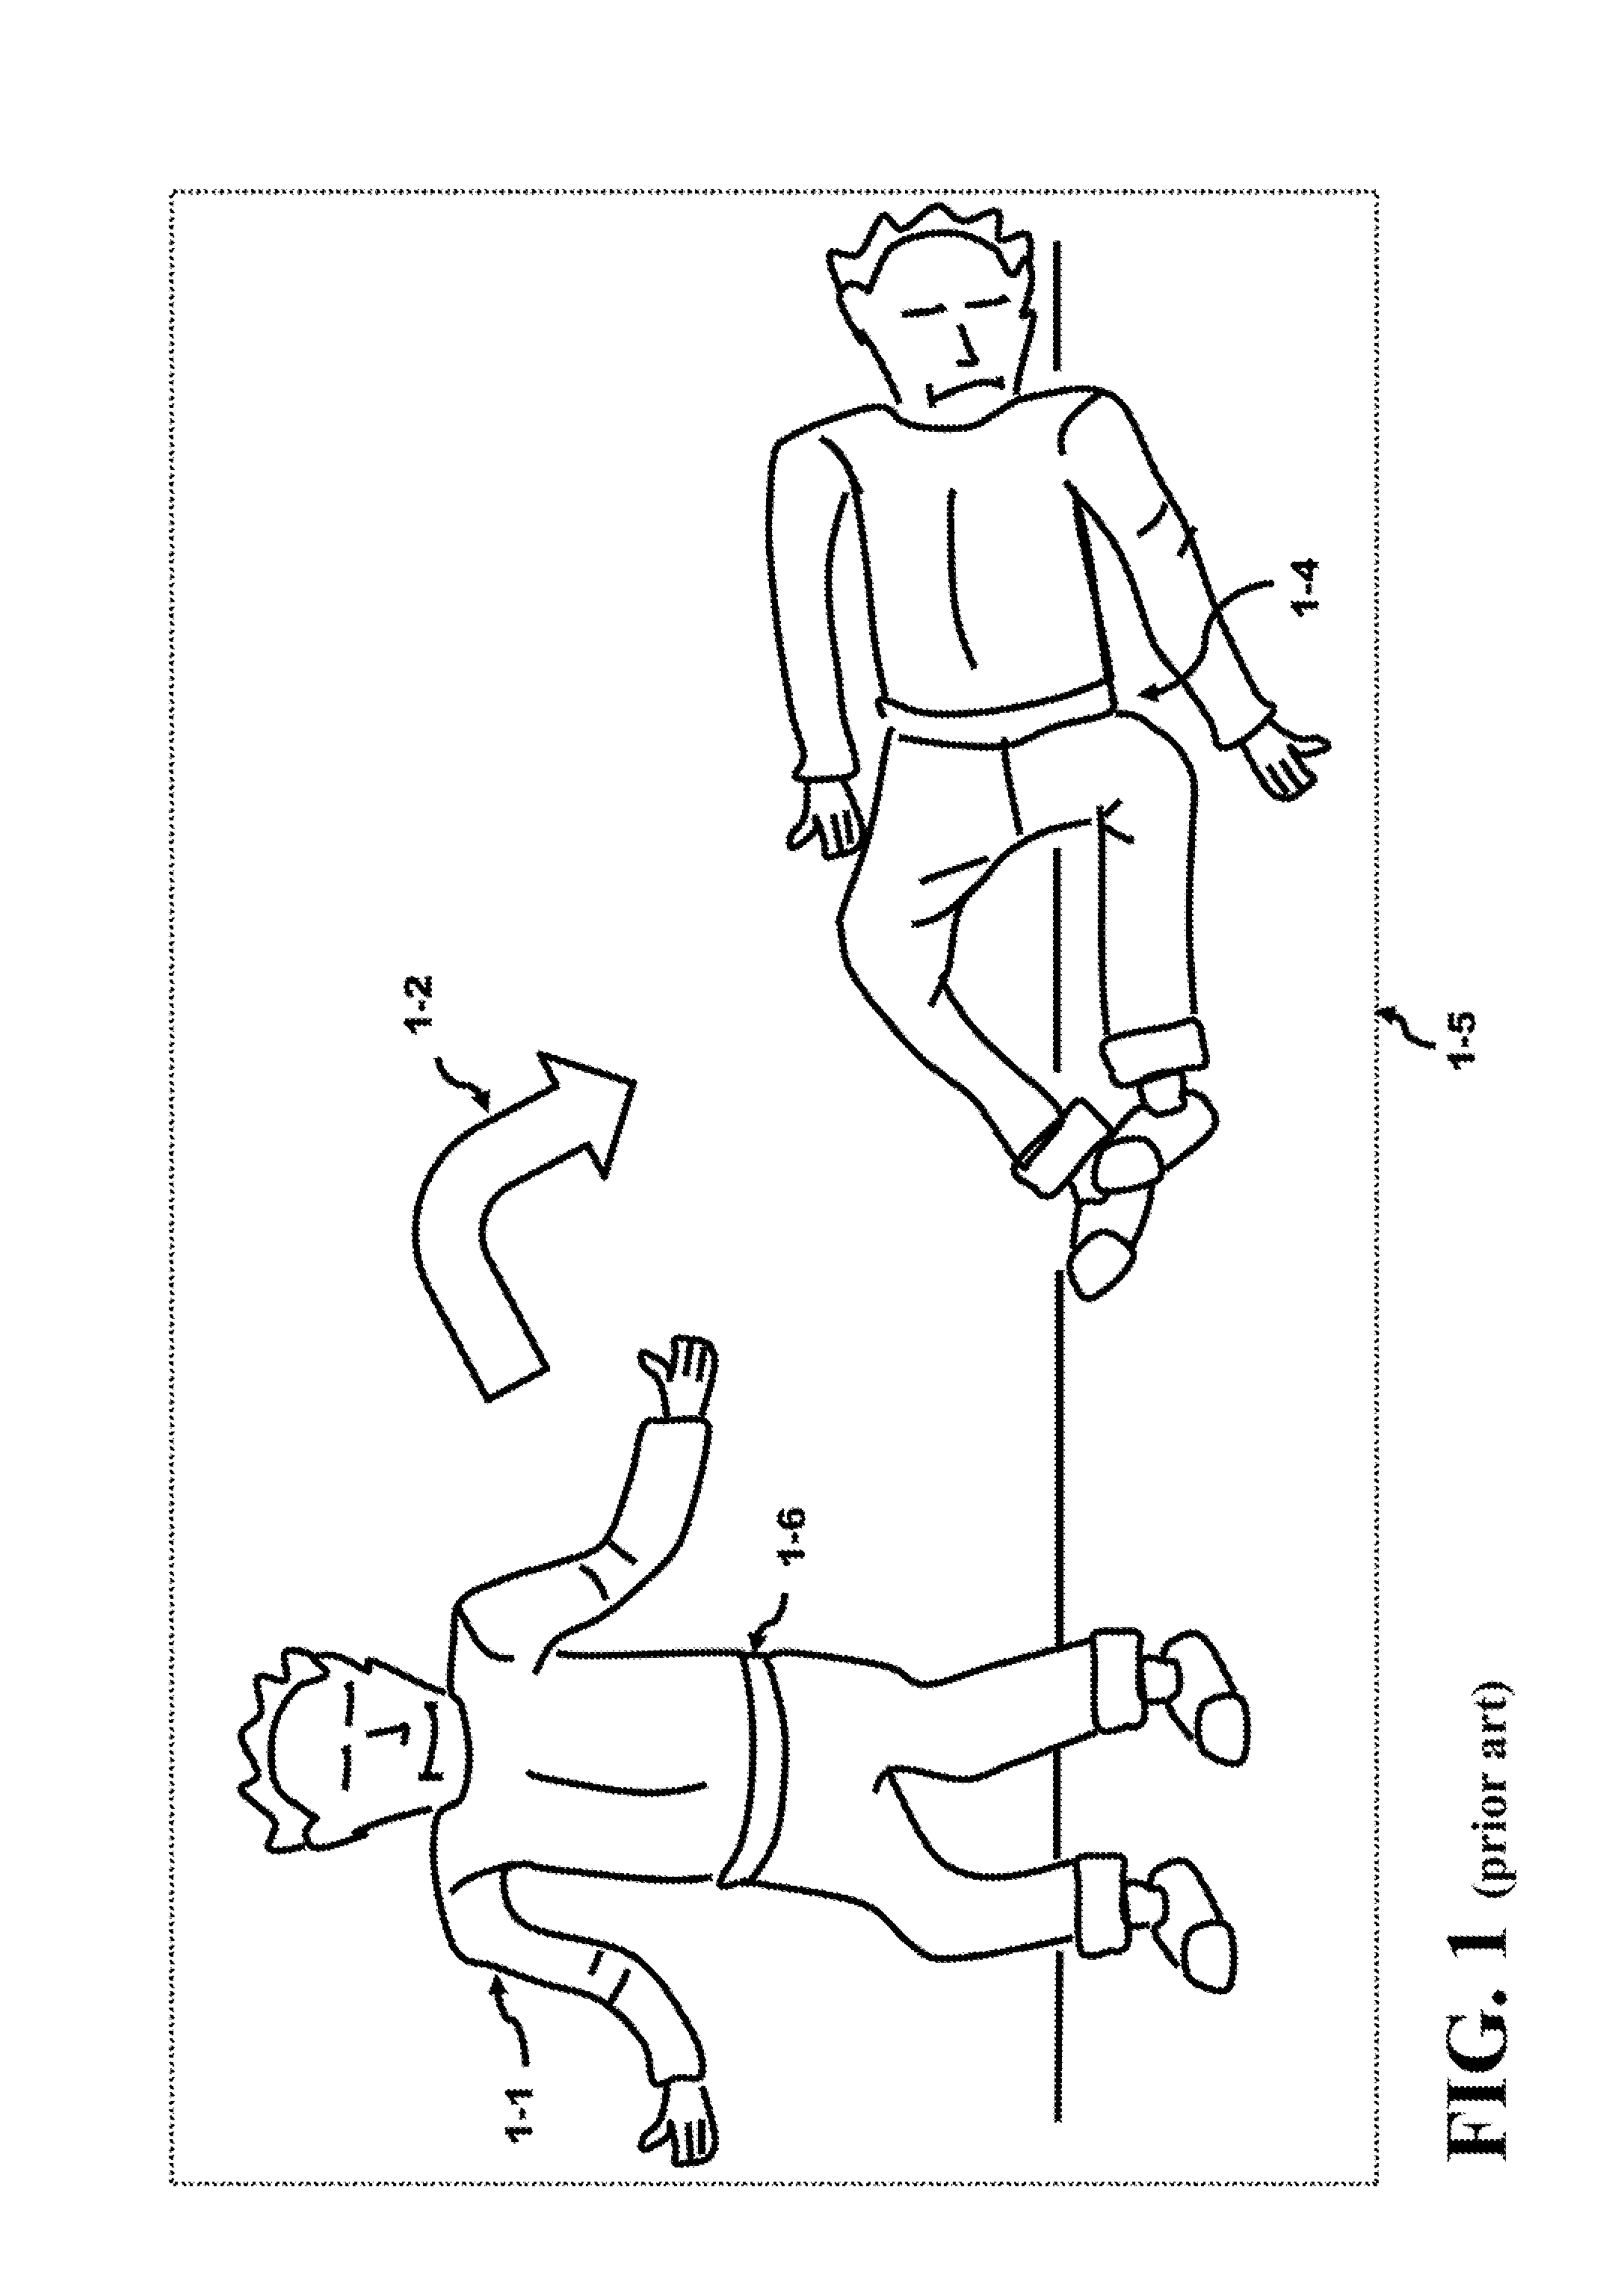 Method and Apparatus of Preventing a Fall or Minimizing the Impact of the Fall of an Individual